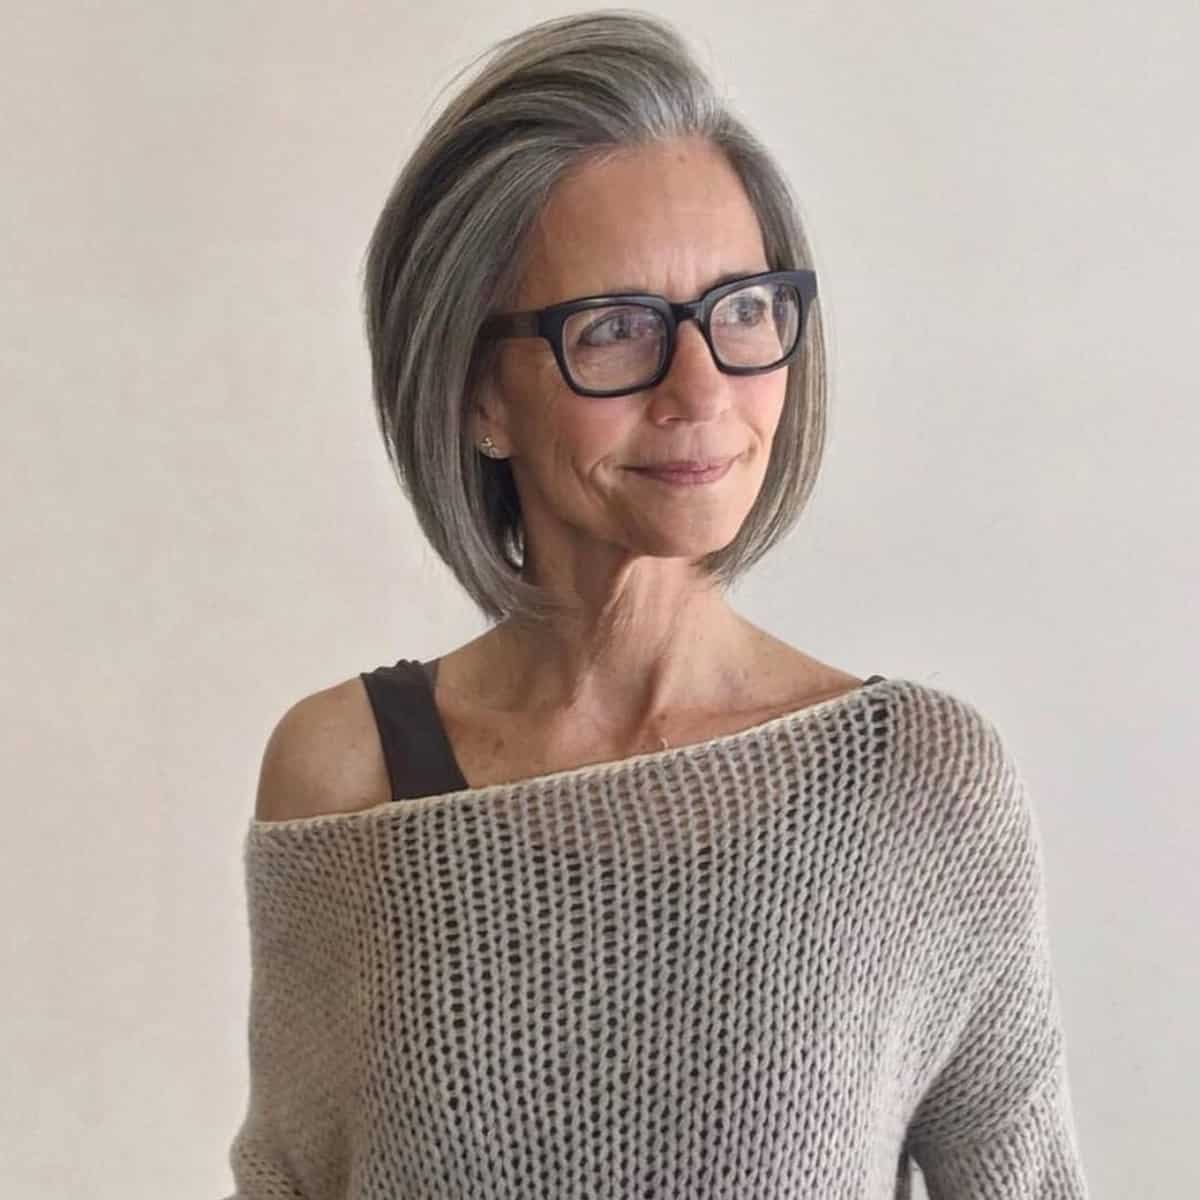 Short grey-haired bob for older women with glasses